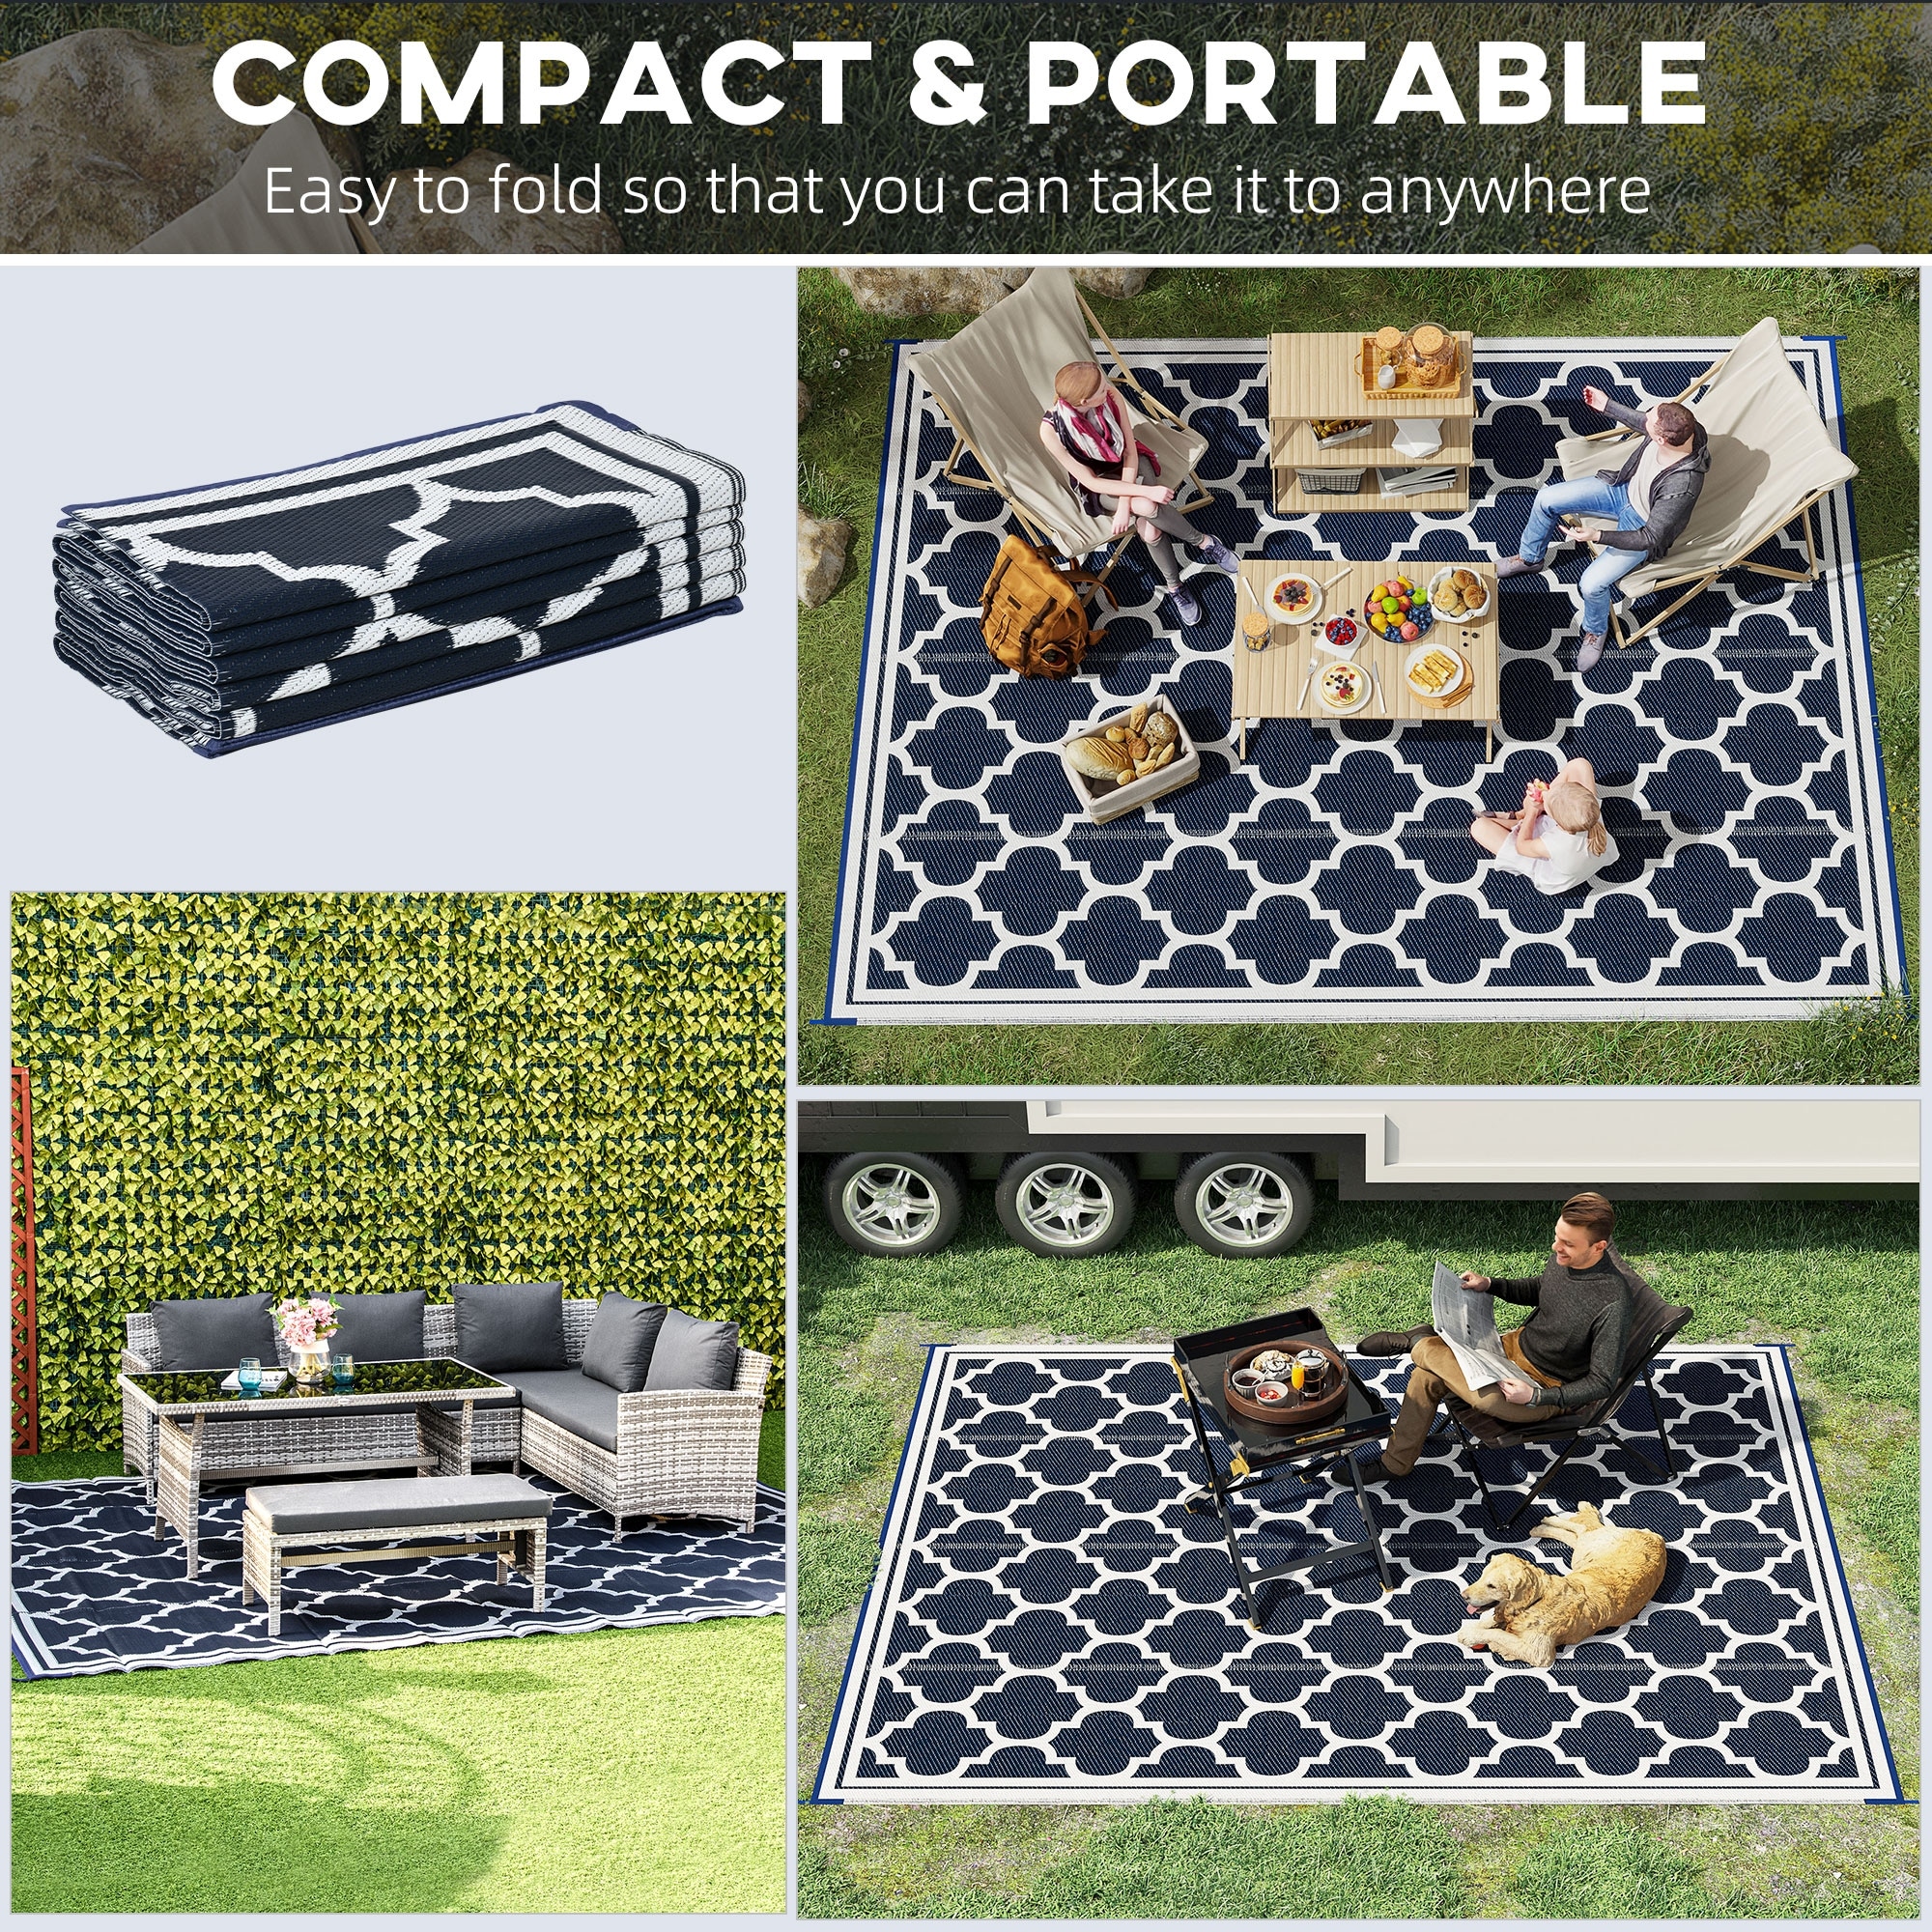 Do you need a camping rug for RV camping?